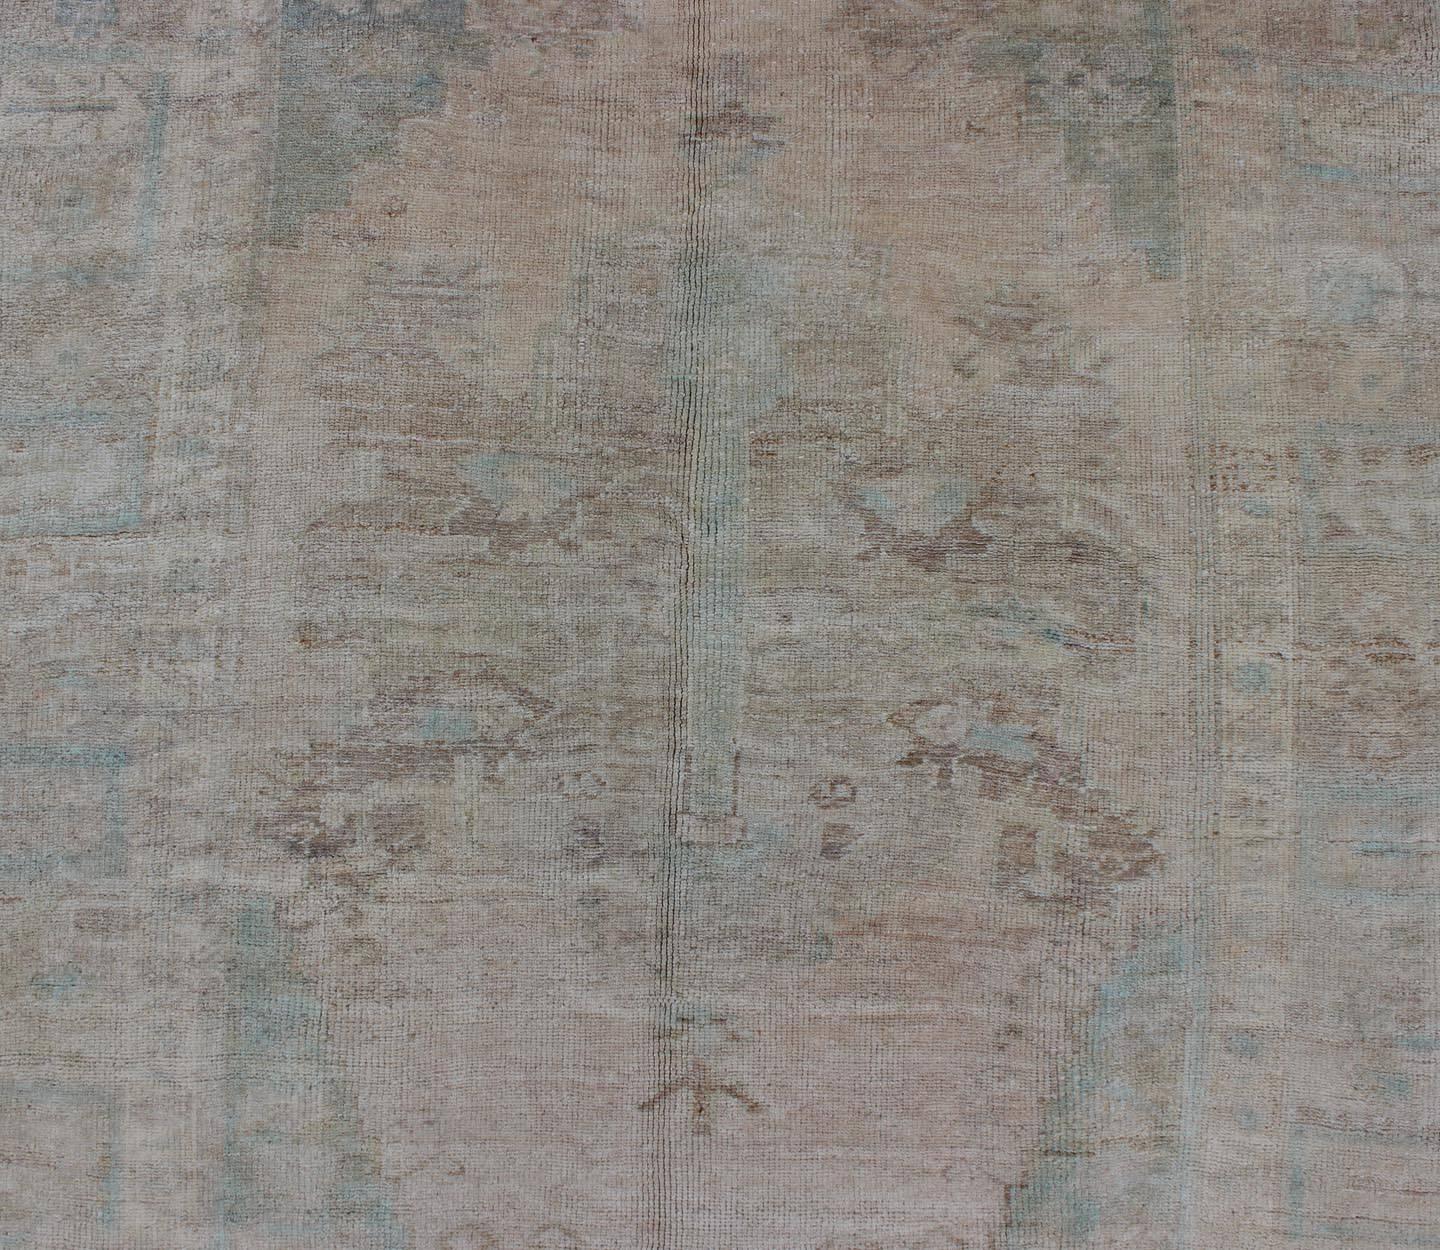 Mid-20th Century Pale Color Vintage Turkish Oushak Rug With Layered Medallion in Teal, Taupe